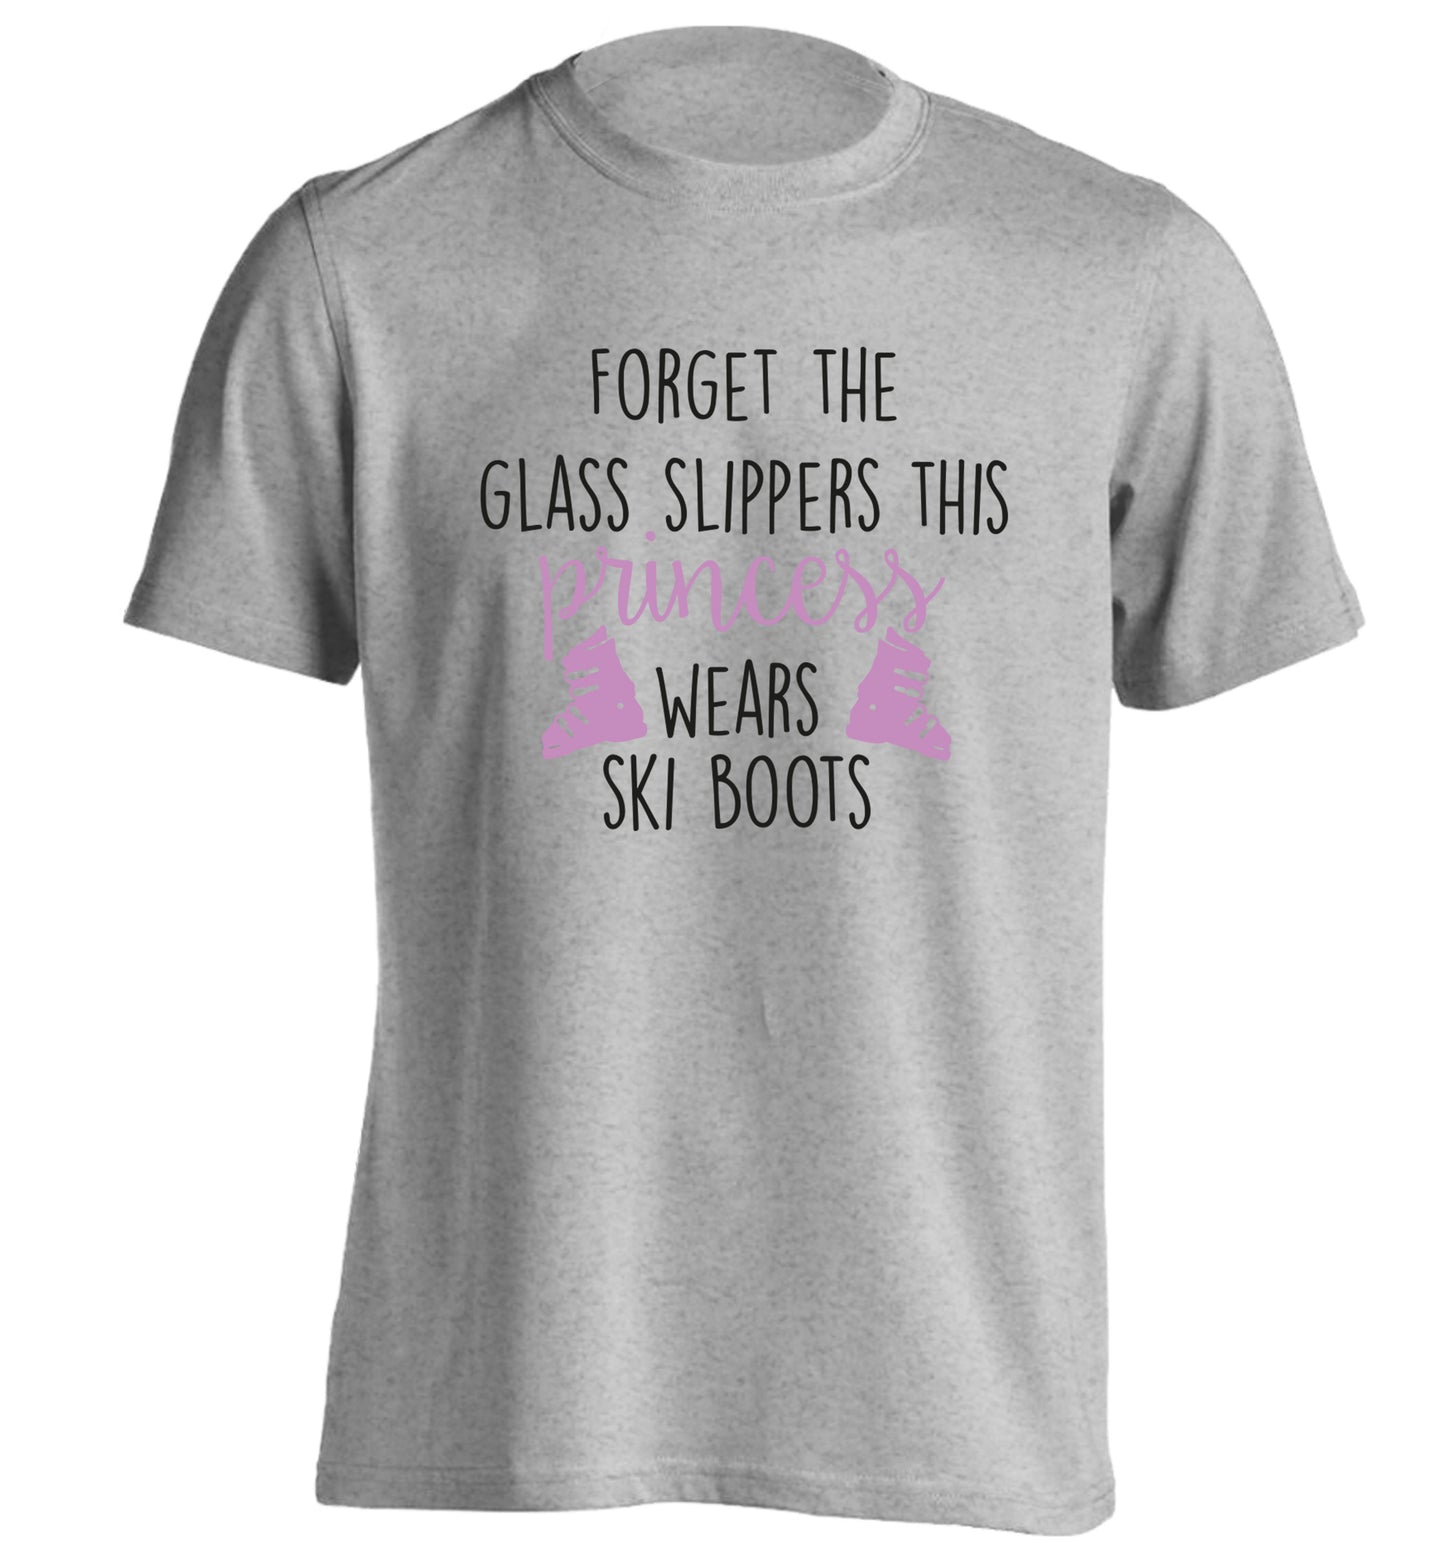 Forget the glass slippers this princess wears ski boots adults unisex grey Tshirt 2XL